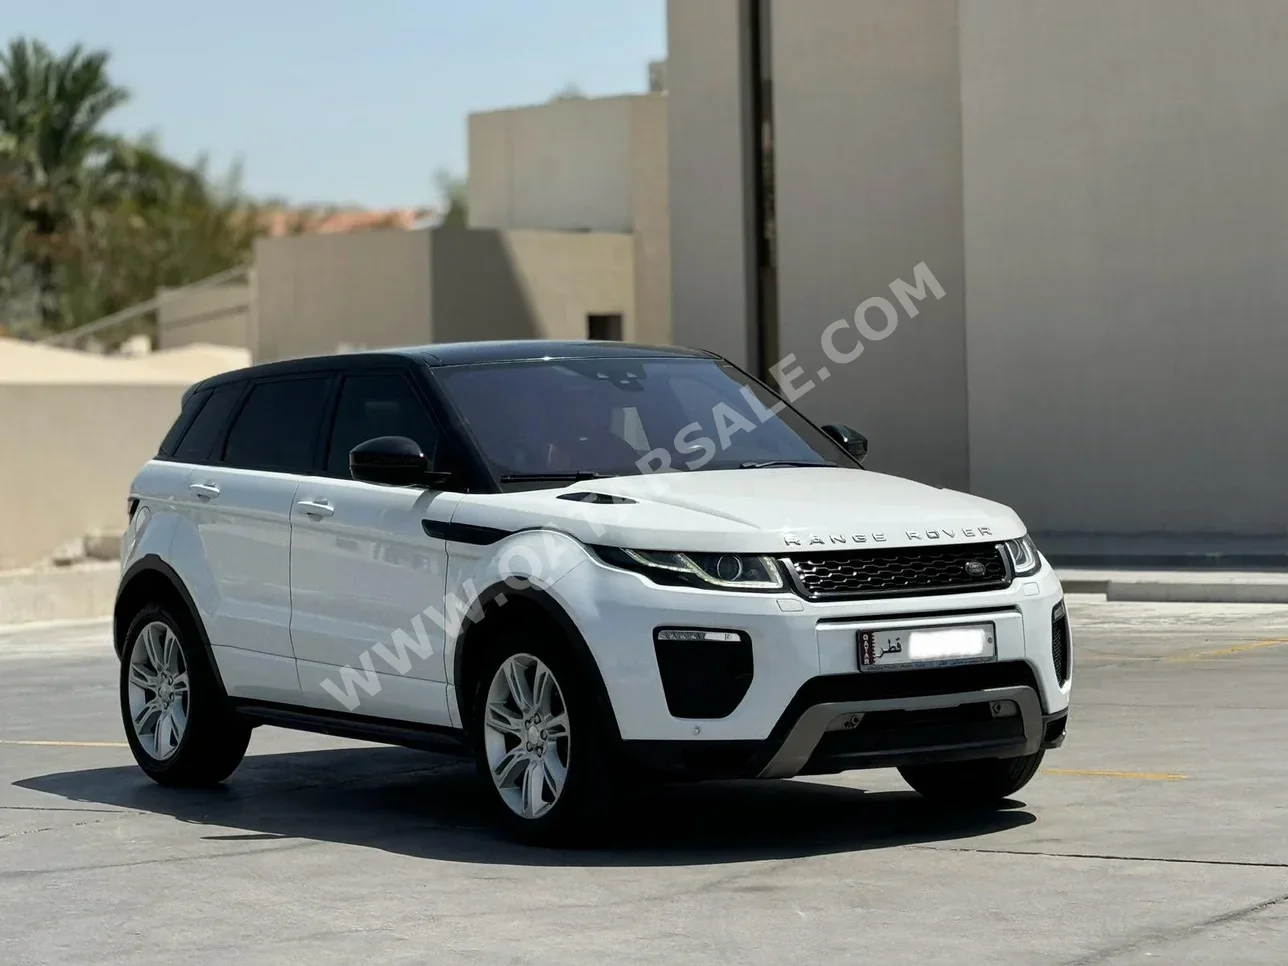 Land Rover  Evoque  Dynamic  2016  Automatic  142,000 Km  4 Cylinder  Four Wheel Drive (4WD)  SUV  White